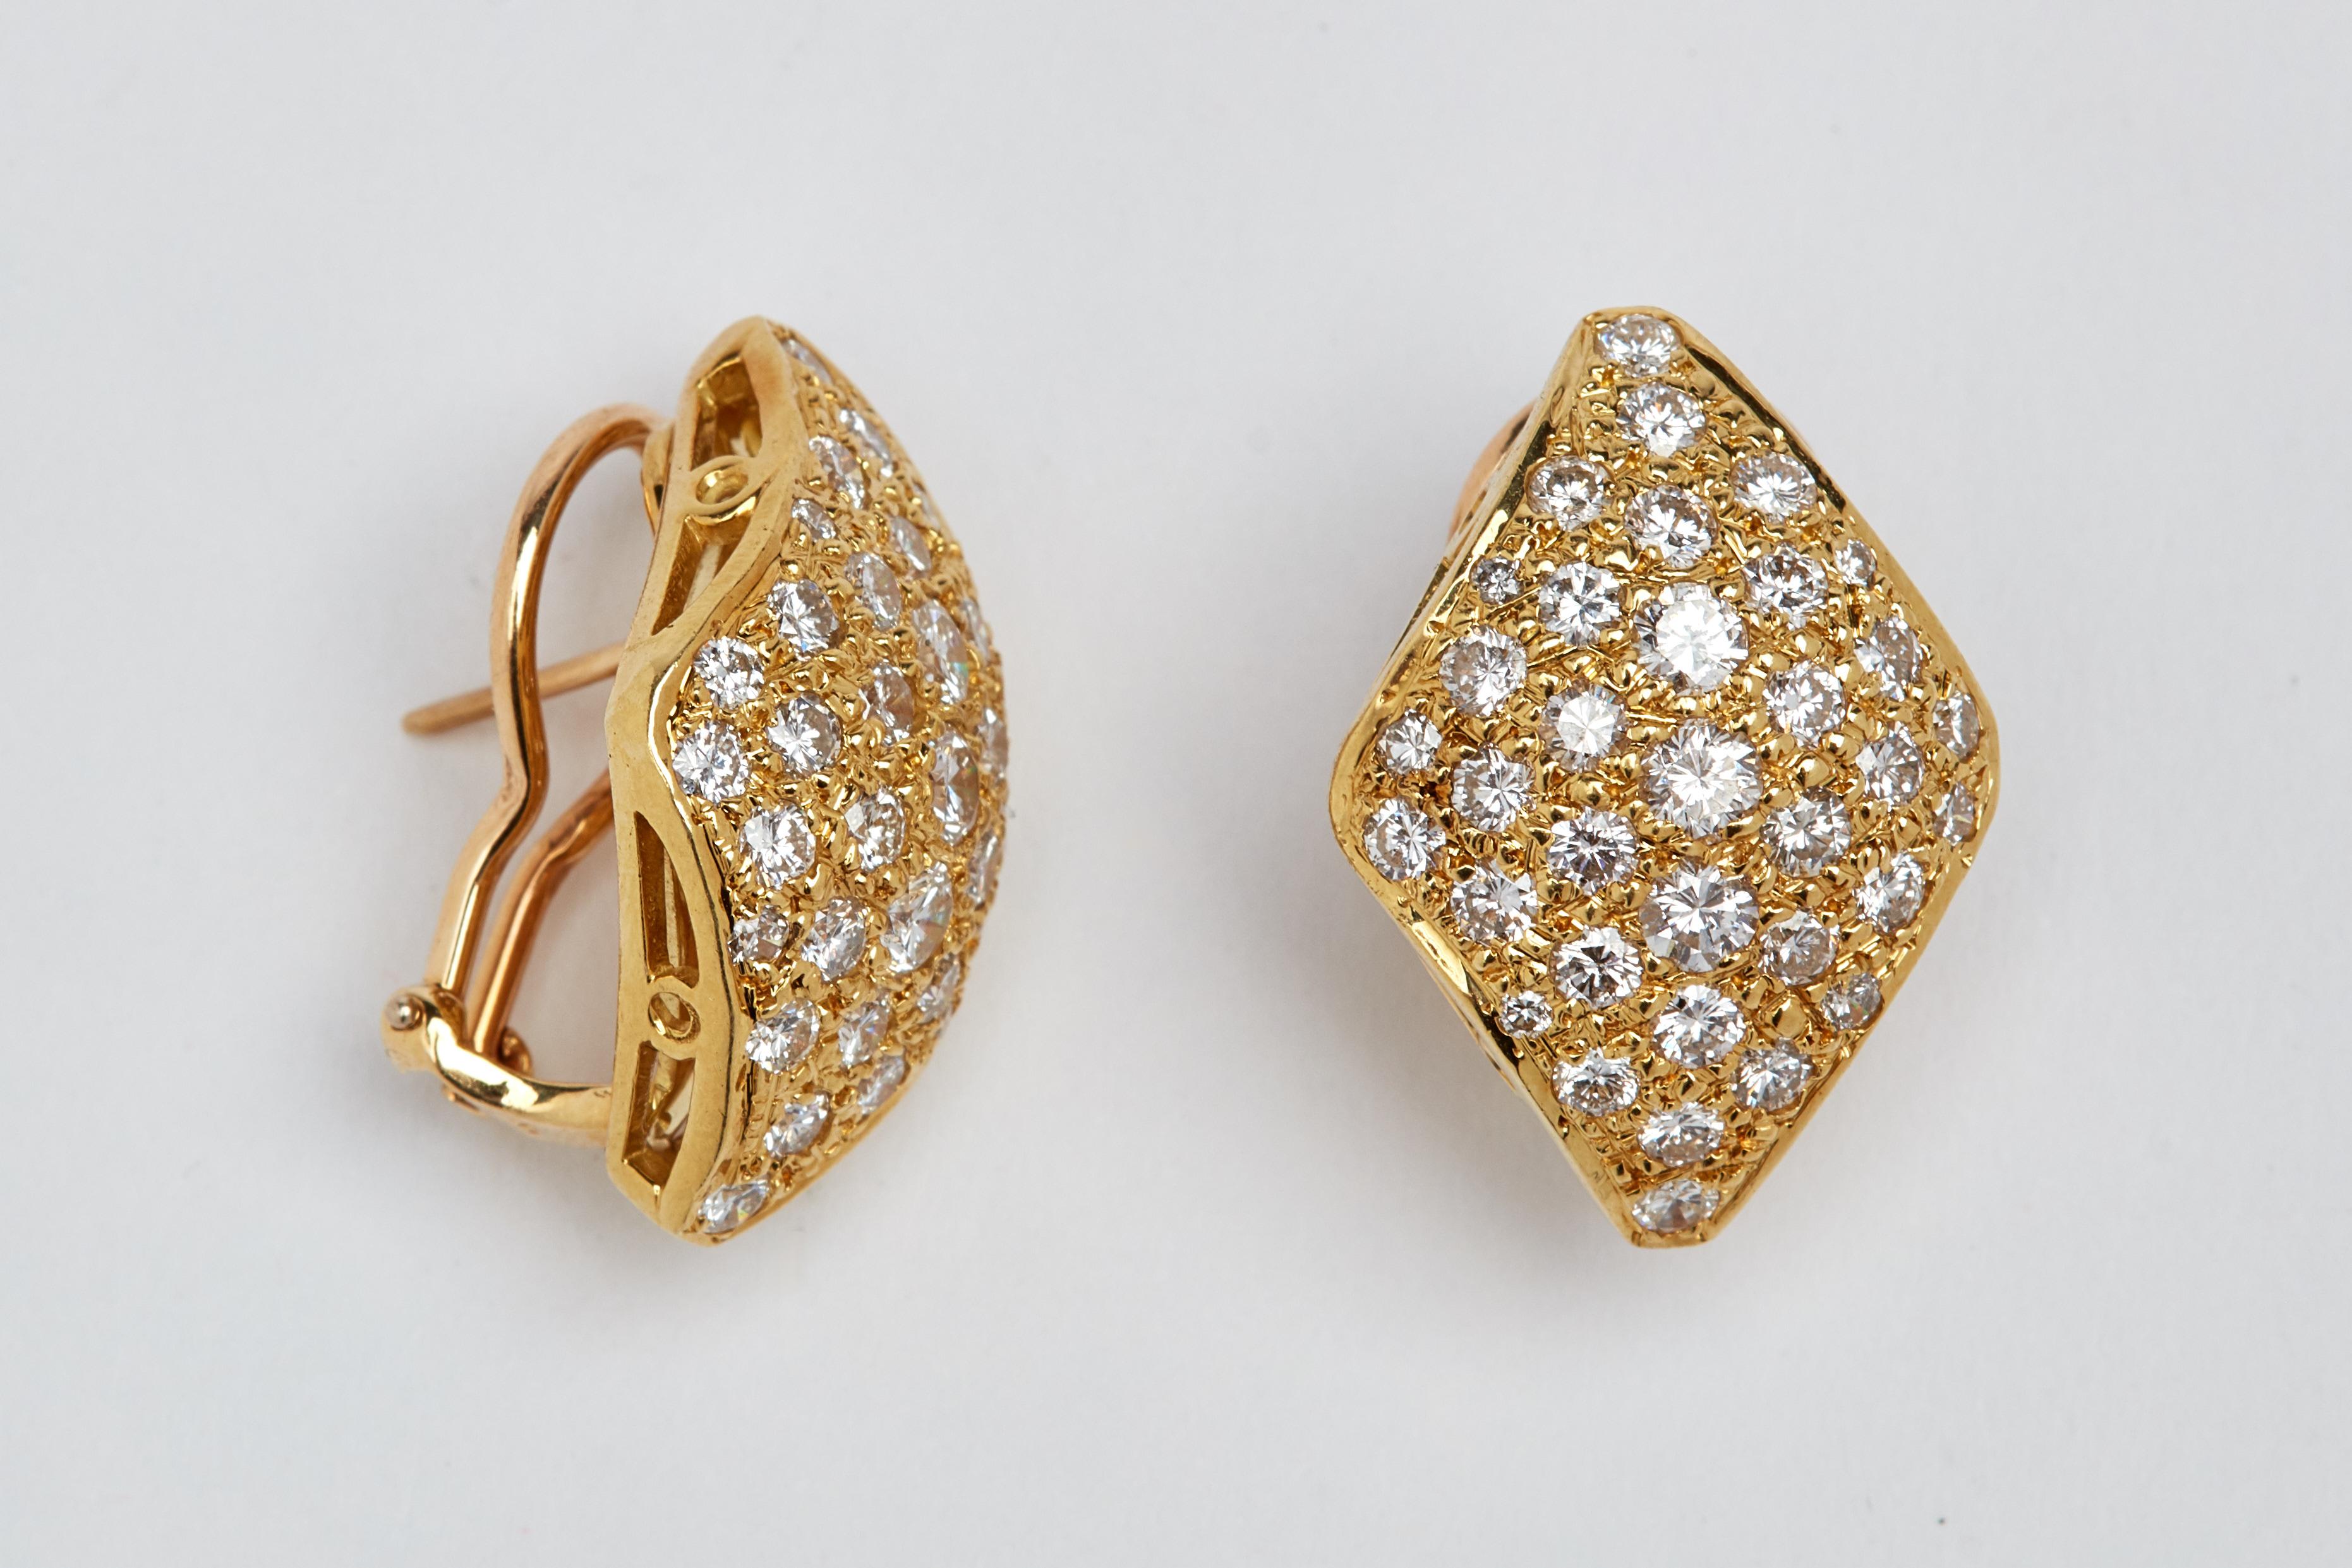 18k yellow gold micro pave earrings with 4.50 carats of white round diamonds. 